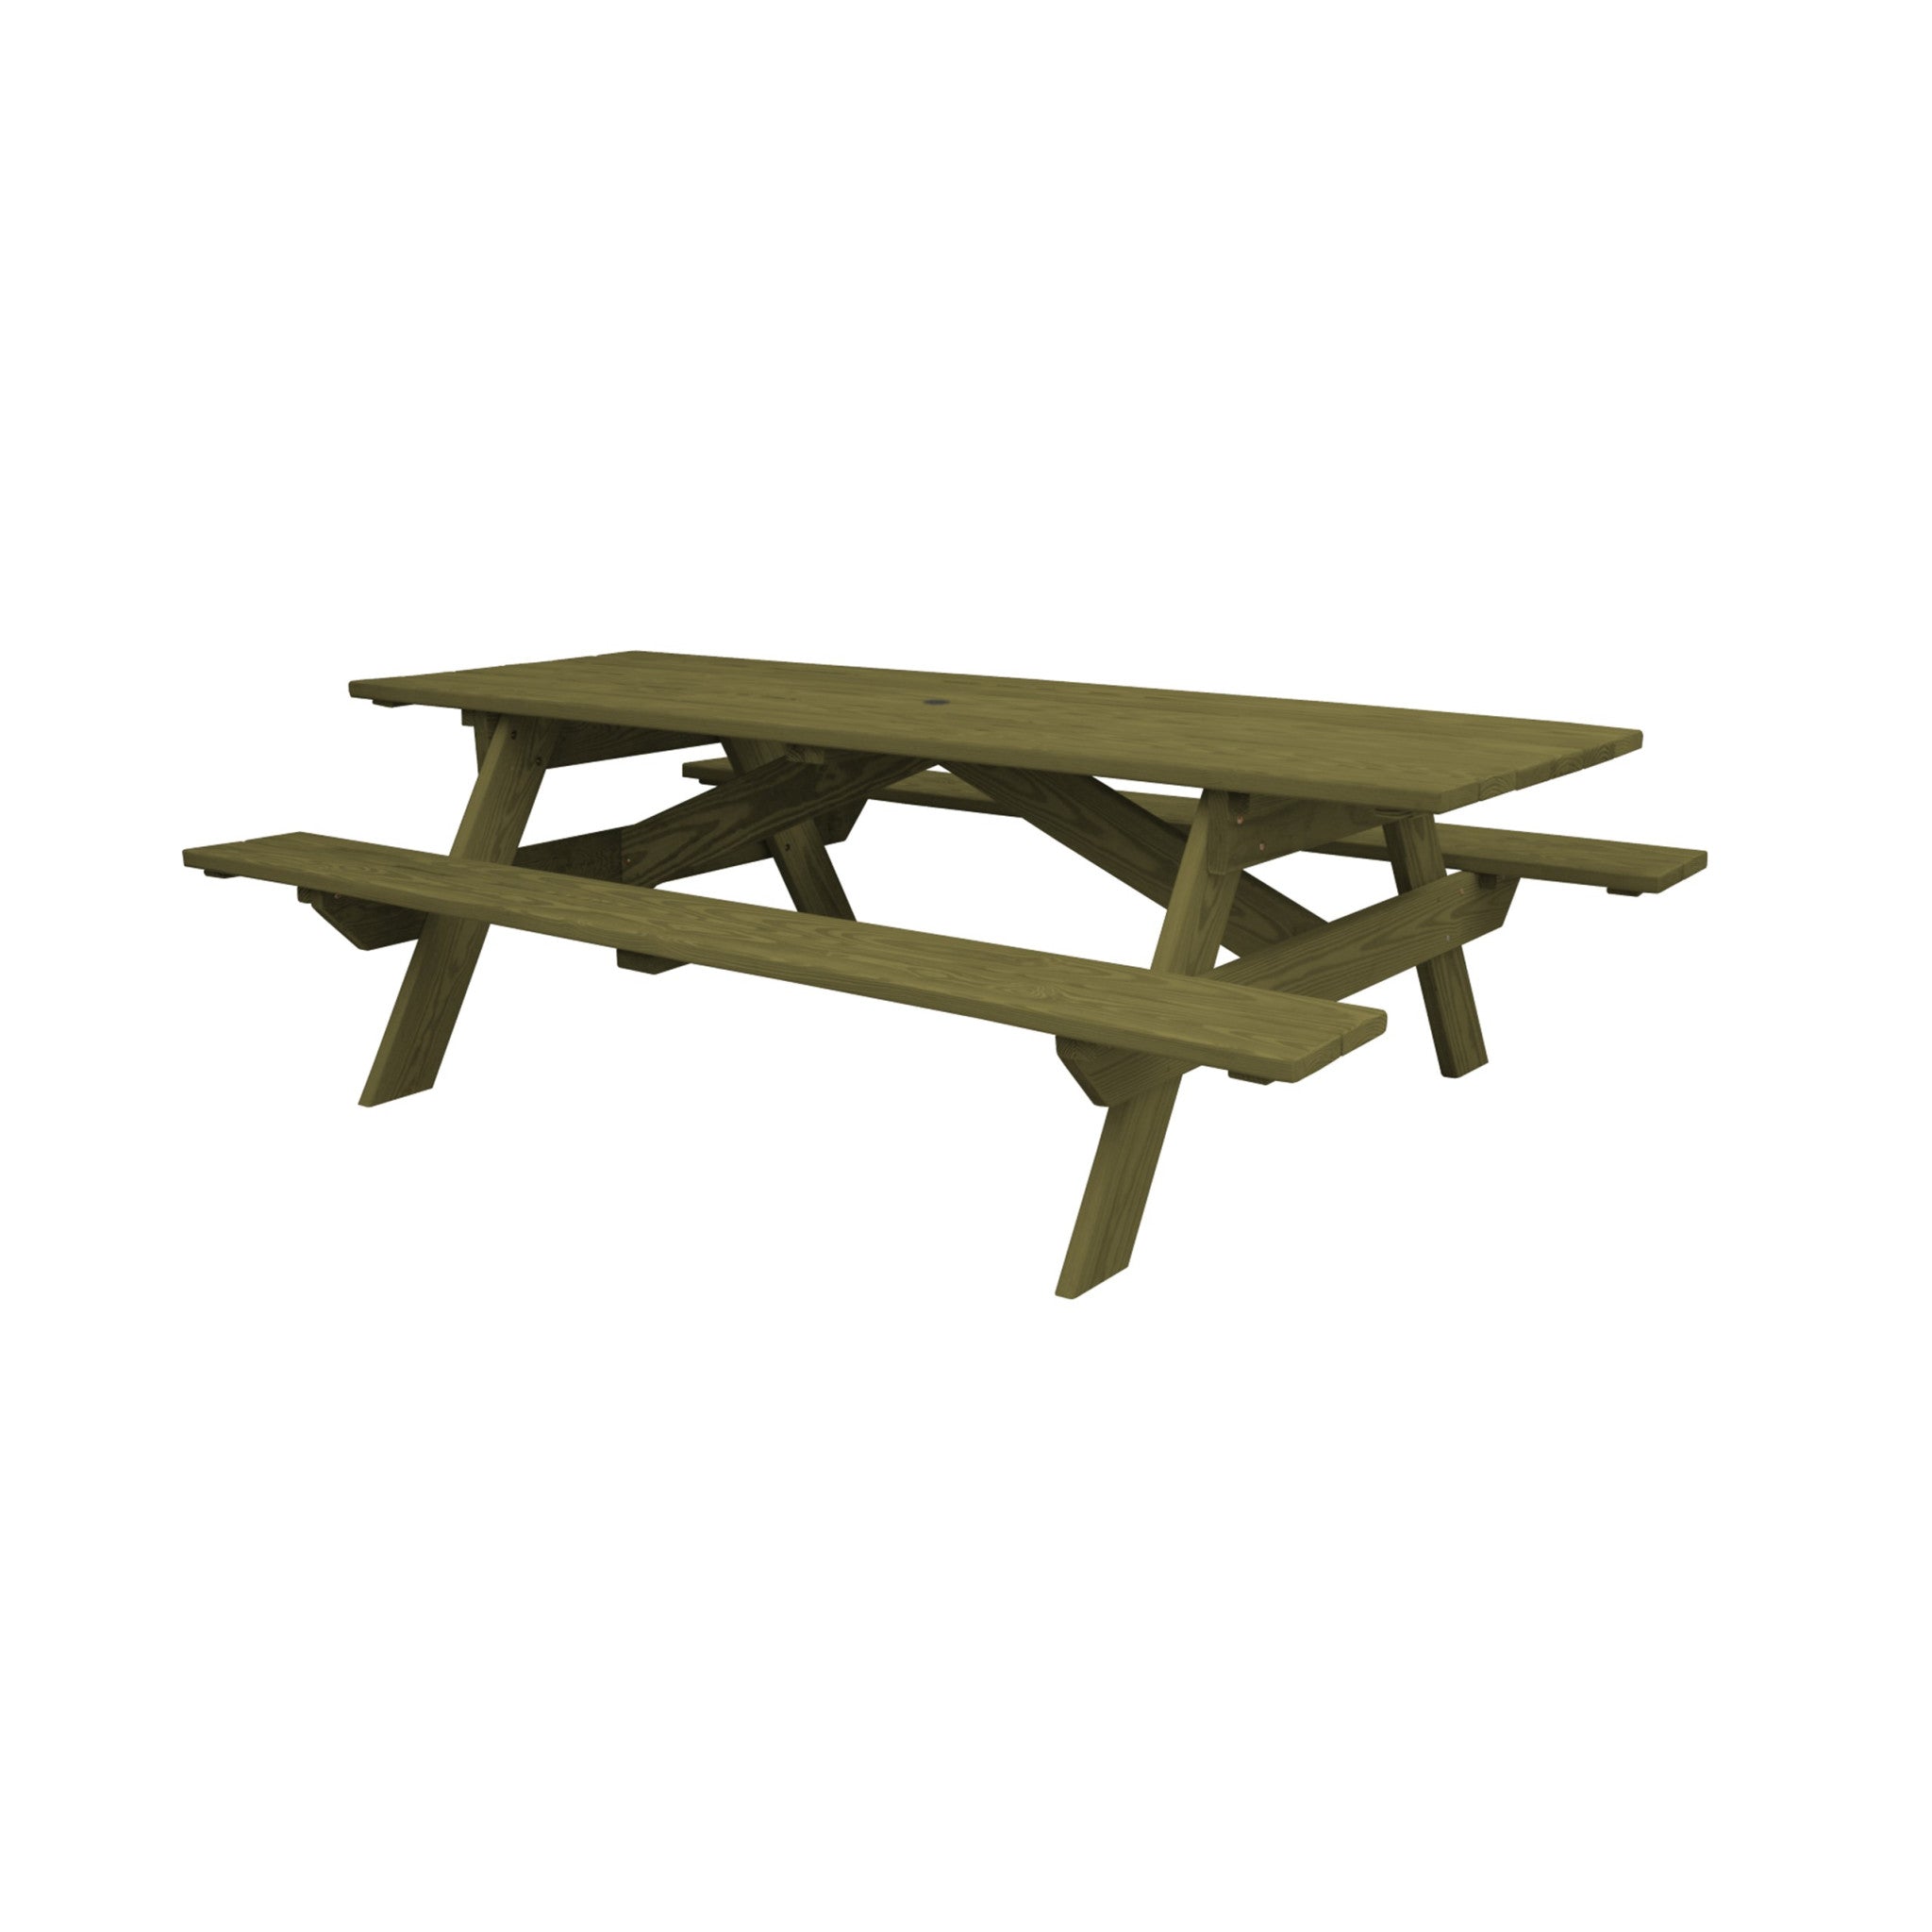 94" Green Solid Wood Outdoor Picnic Table with Umbrella Hole